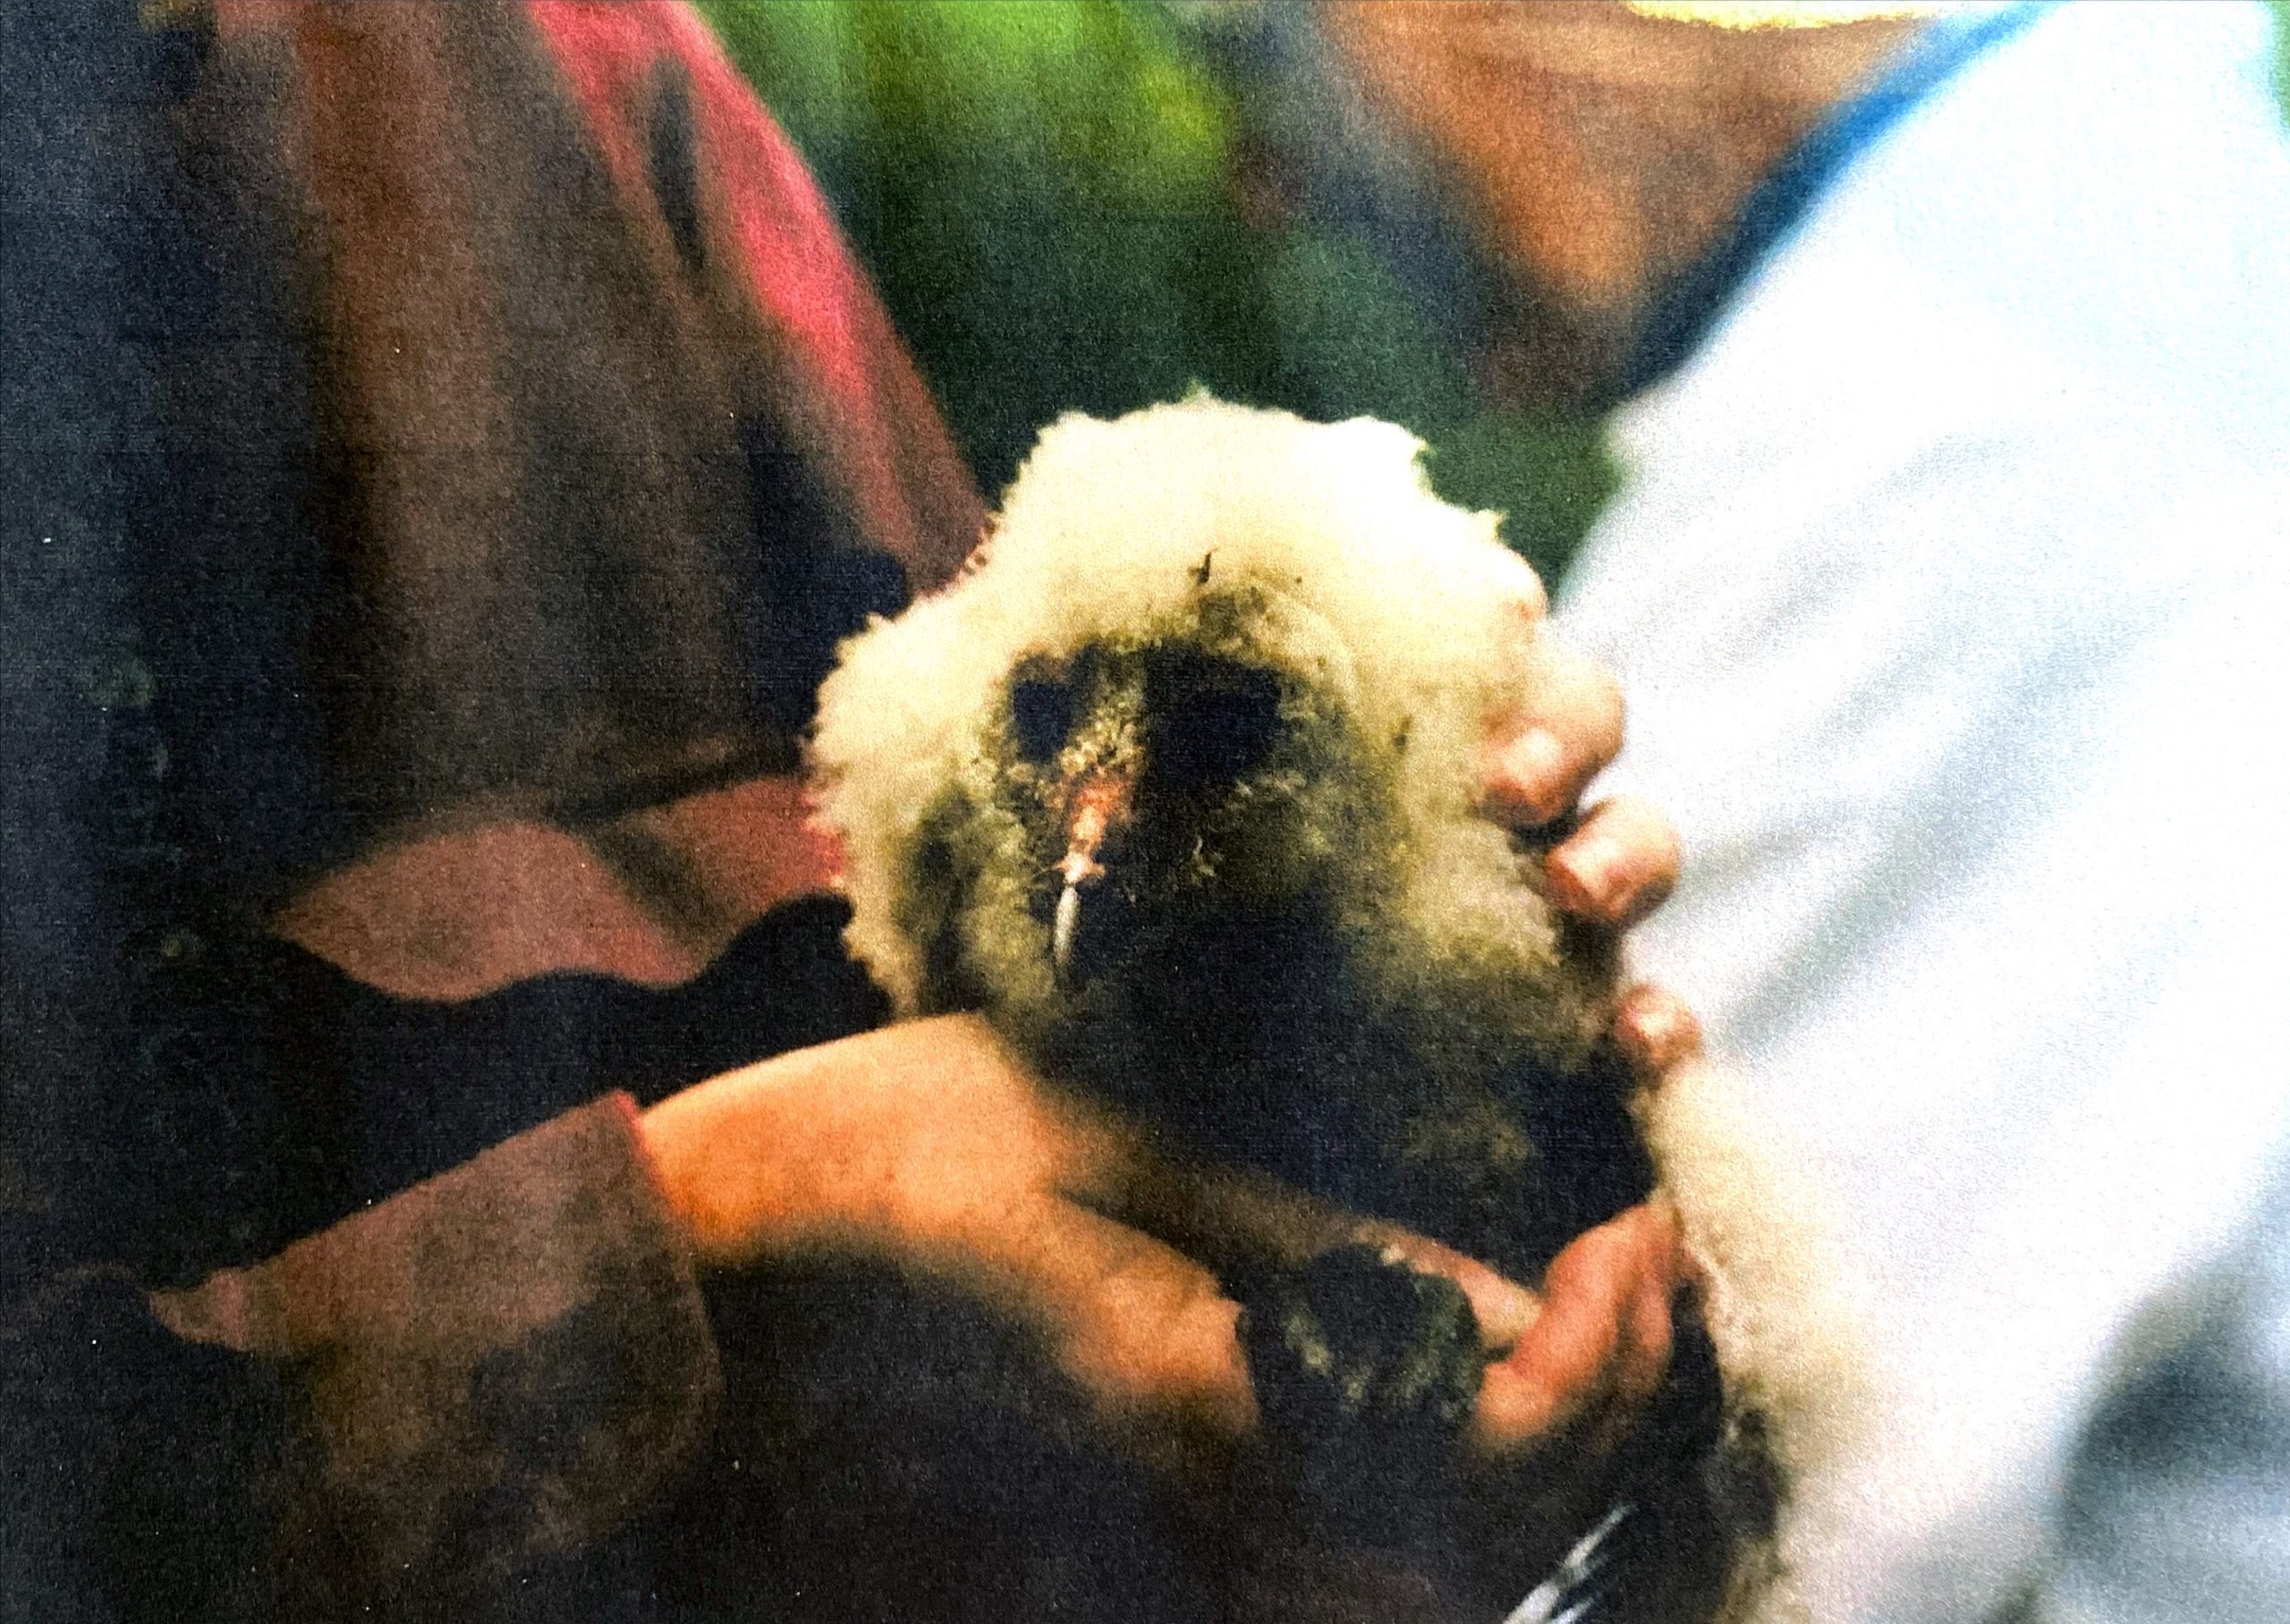 Pete Holding a Barn Owl Chick